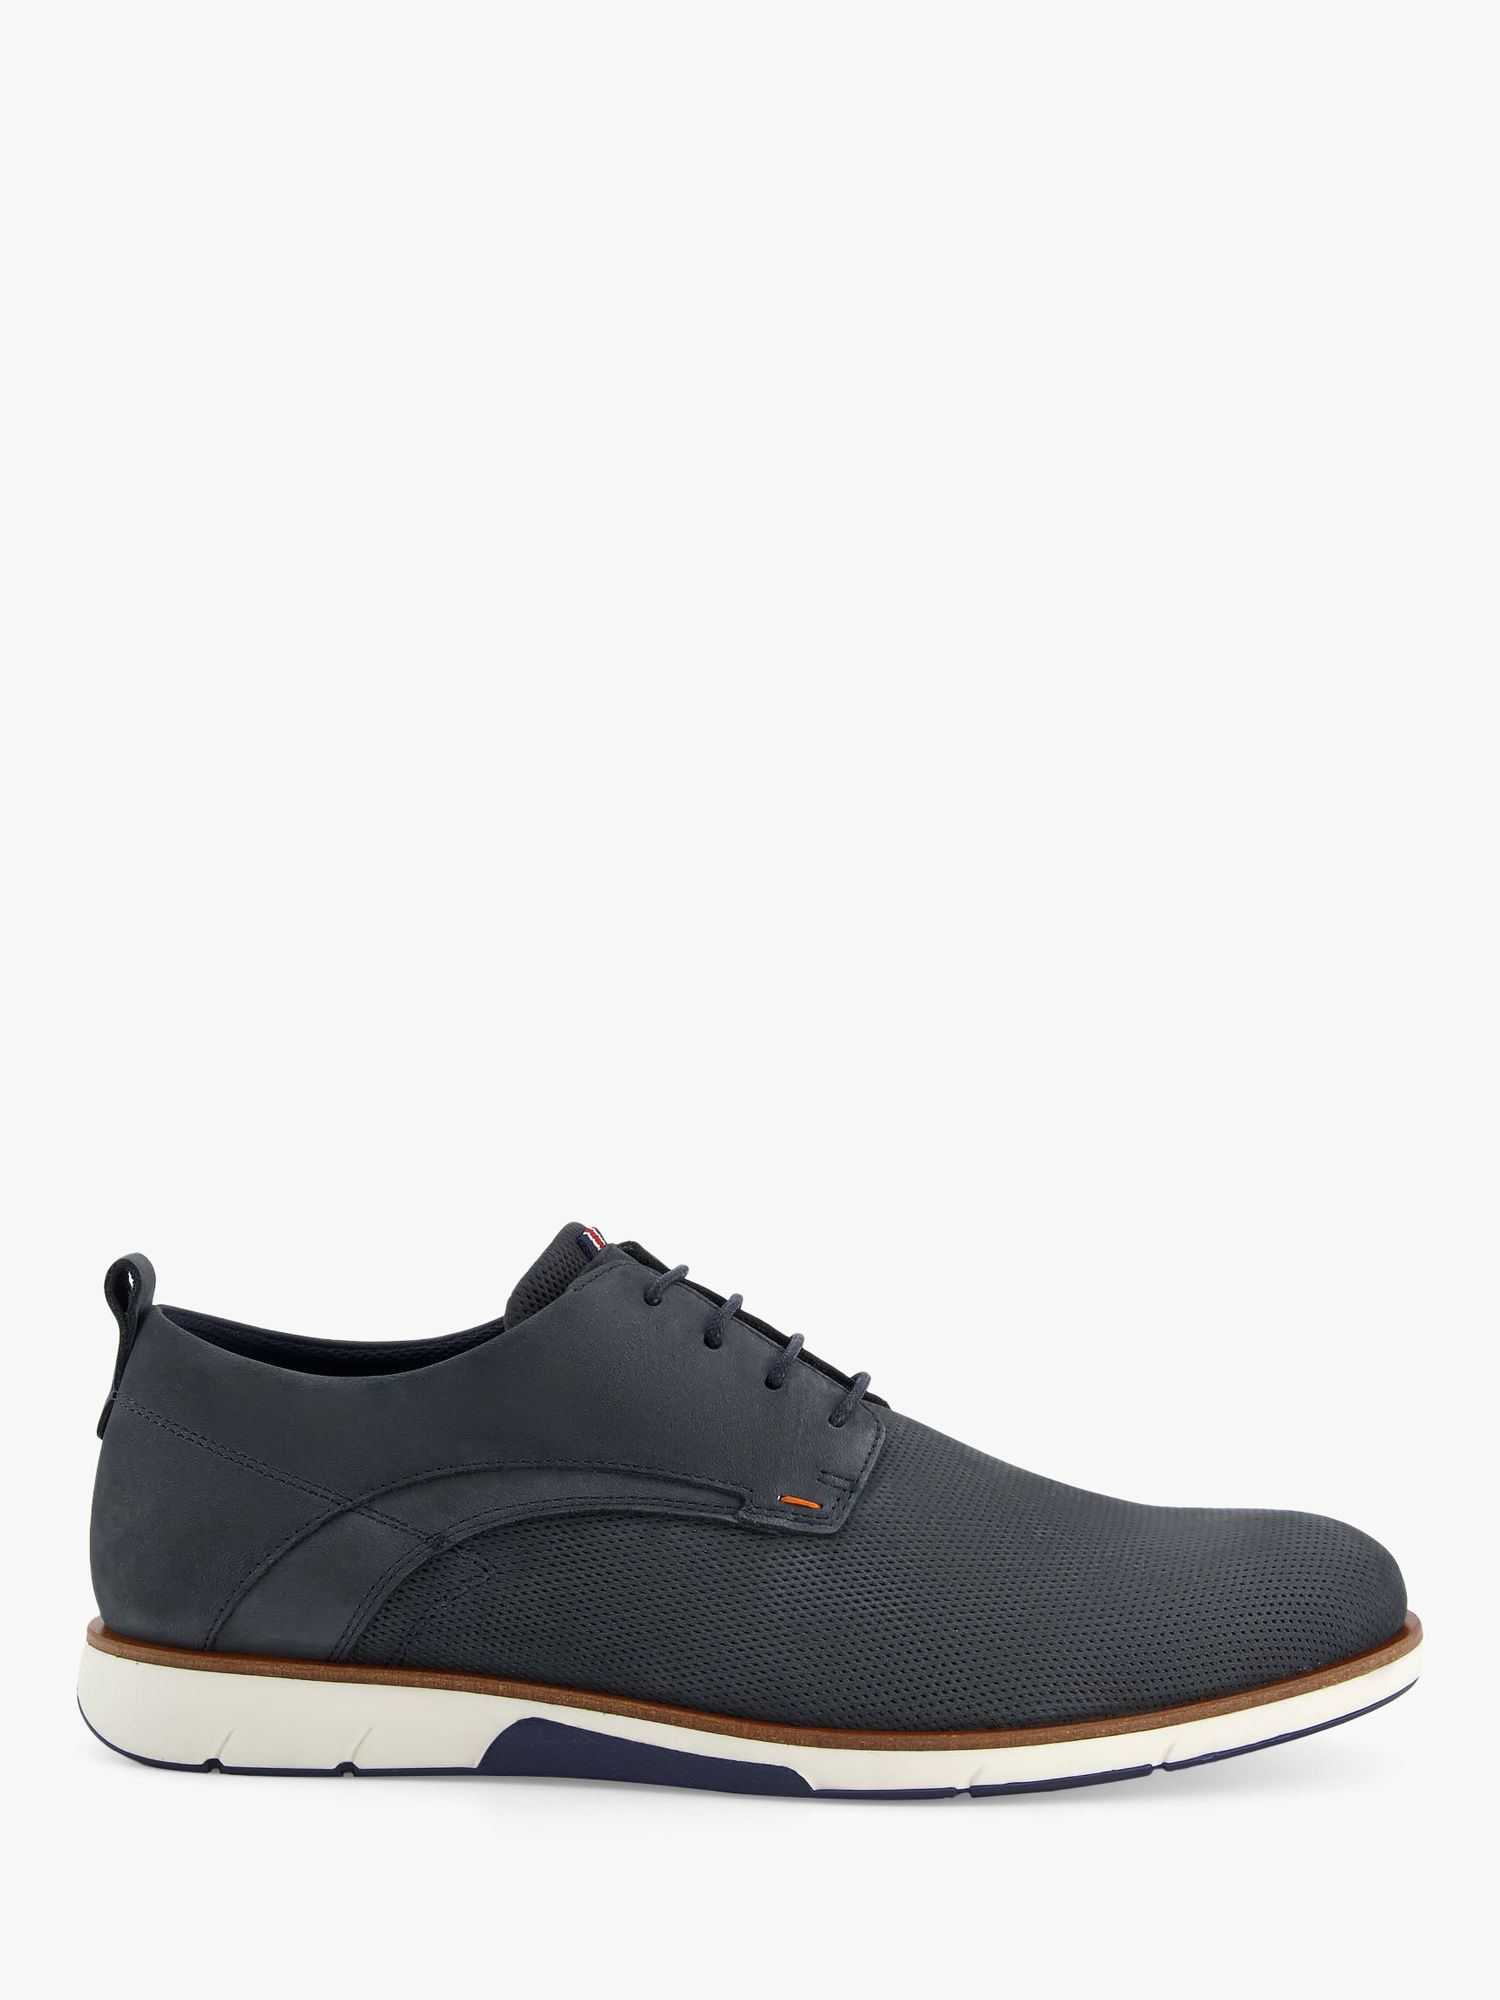 Dune Balad Wide Fit Nubuck Punch Hole Casual Shoes, Blue at John Lewis ...